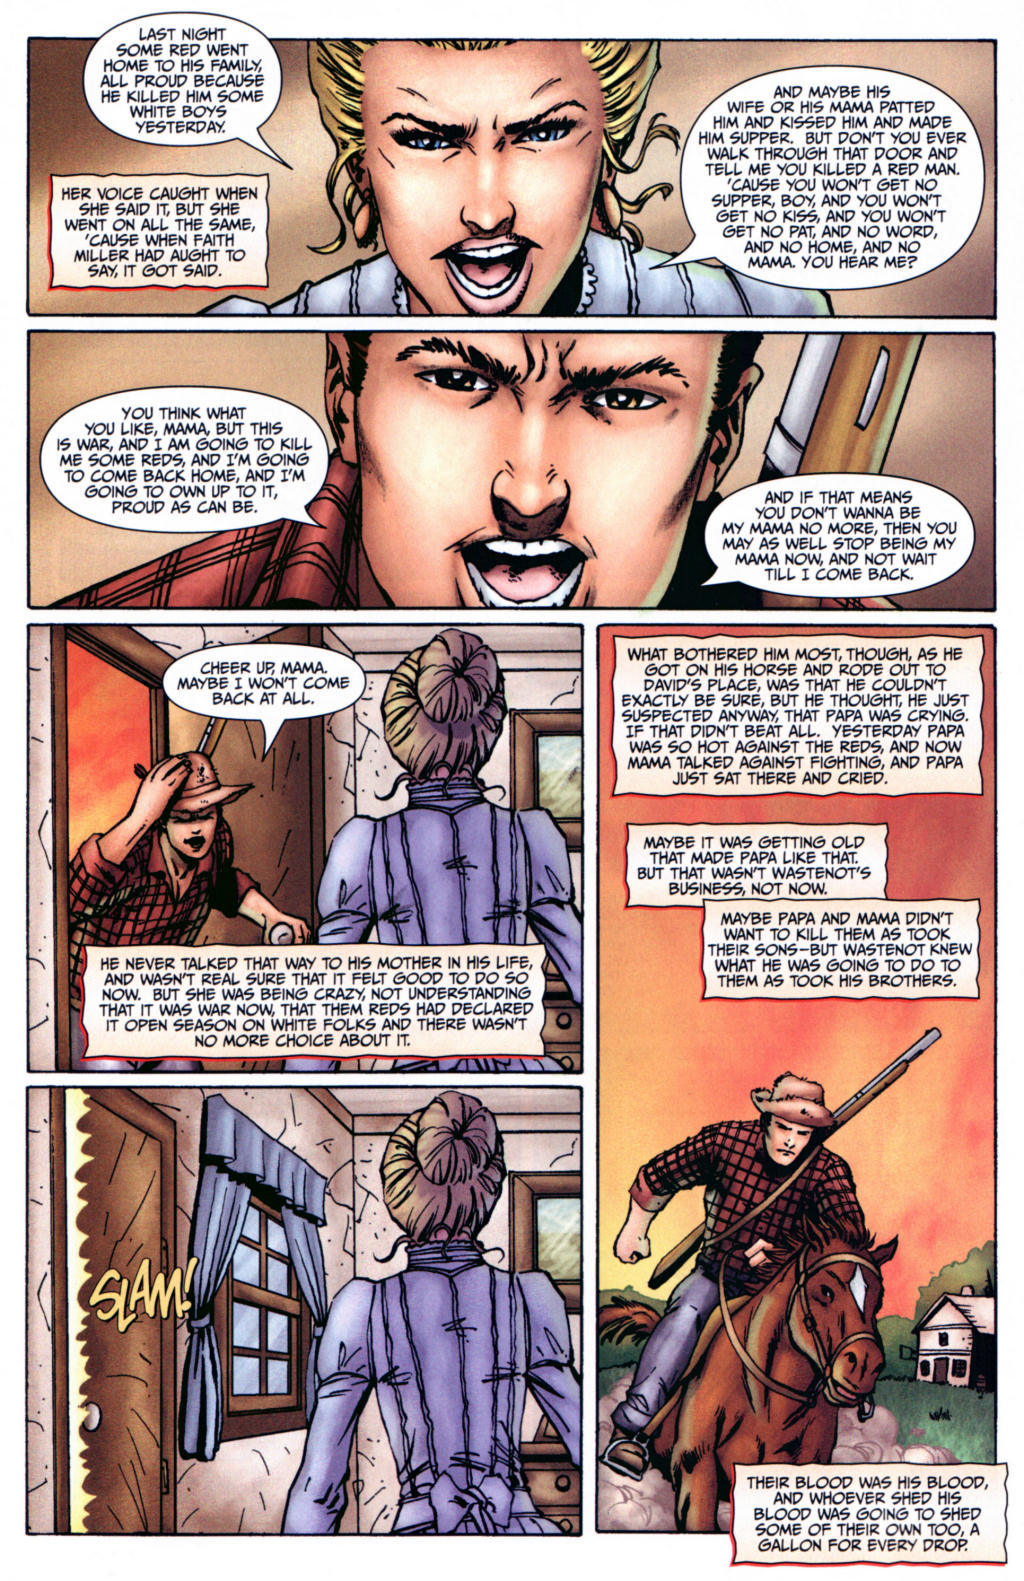 Red Prophet: The Tales of Alvin Maker issue 6 - Page 12